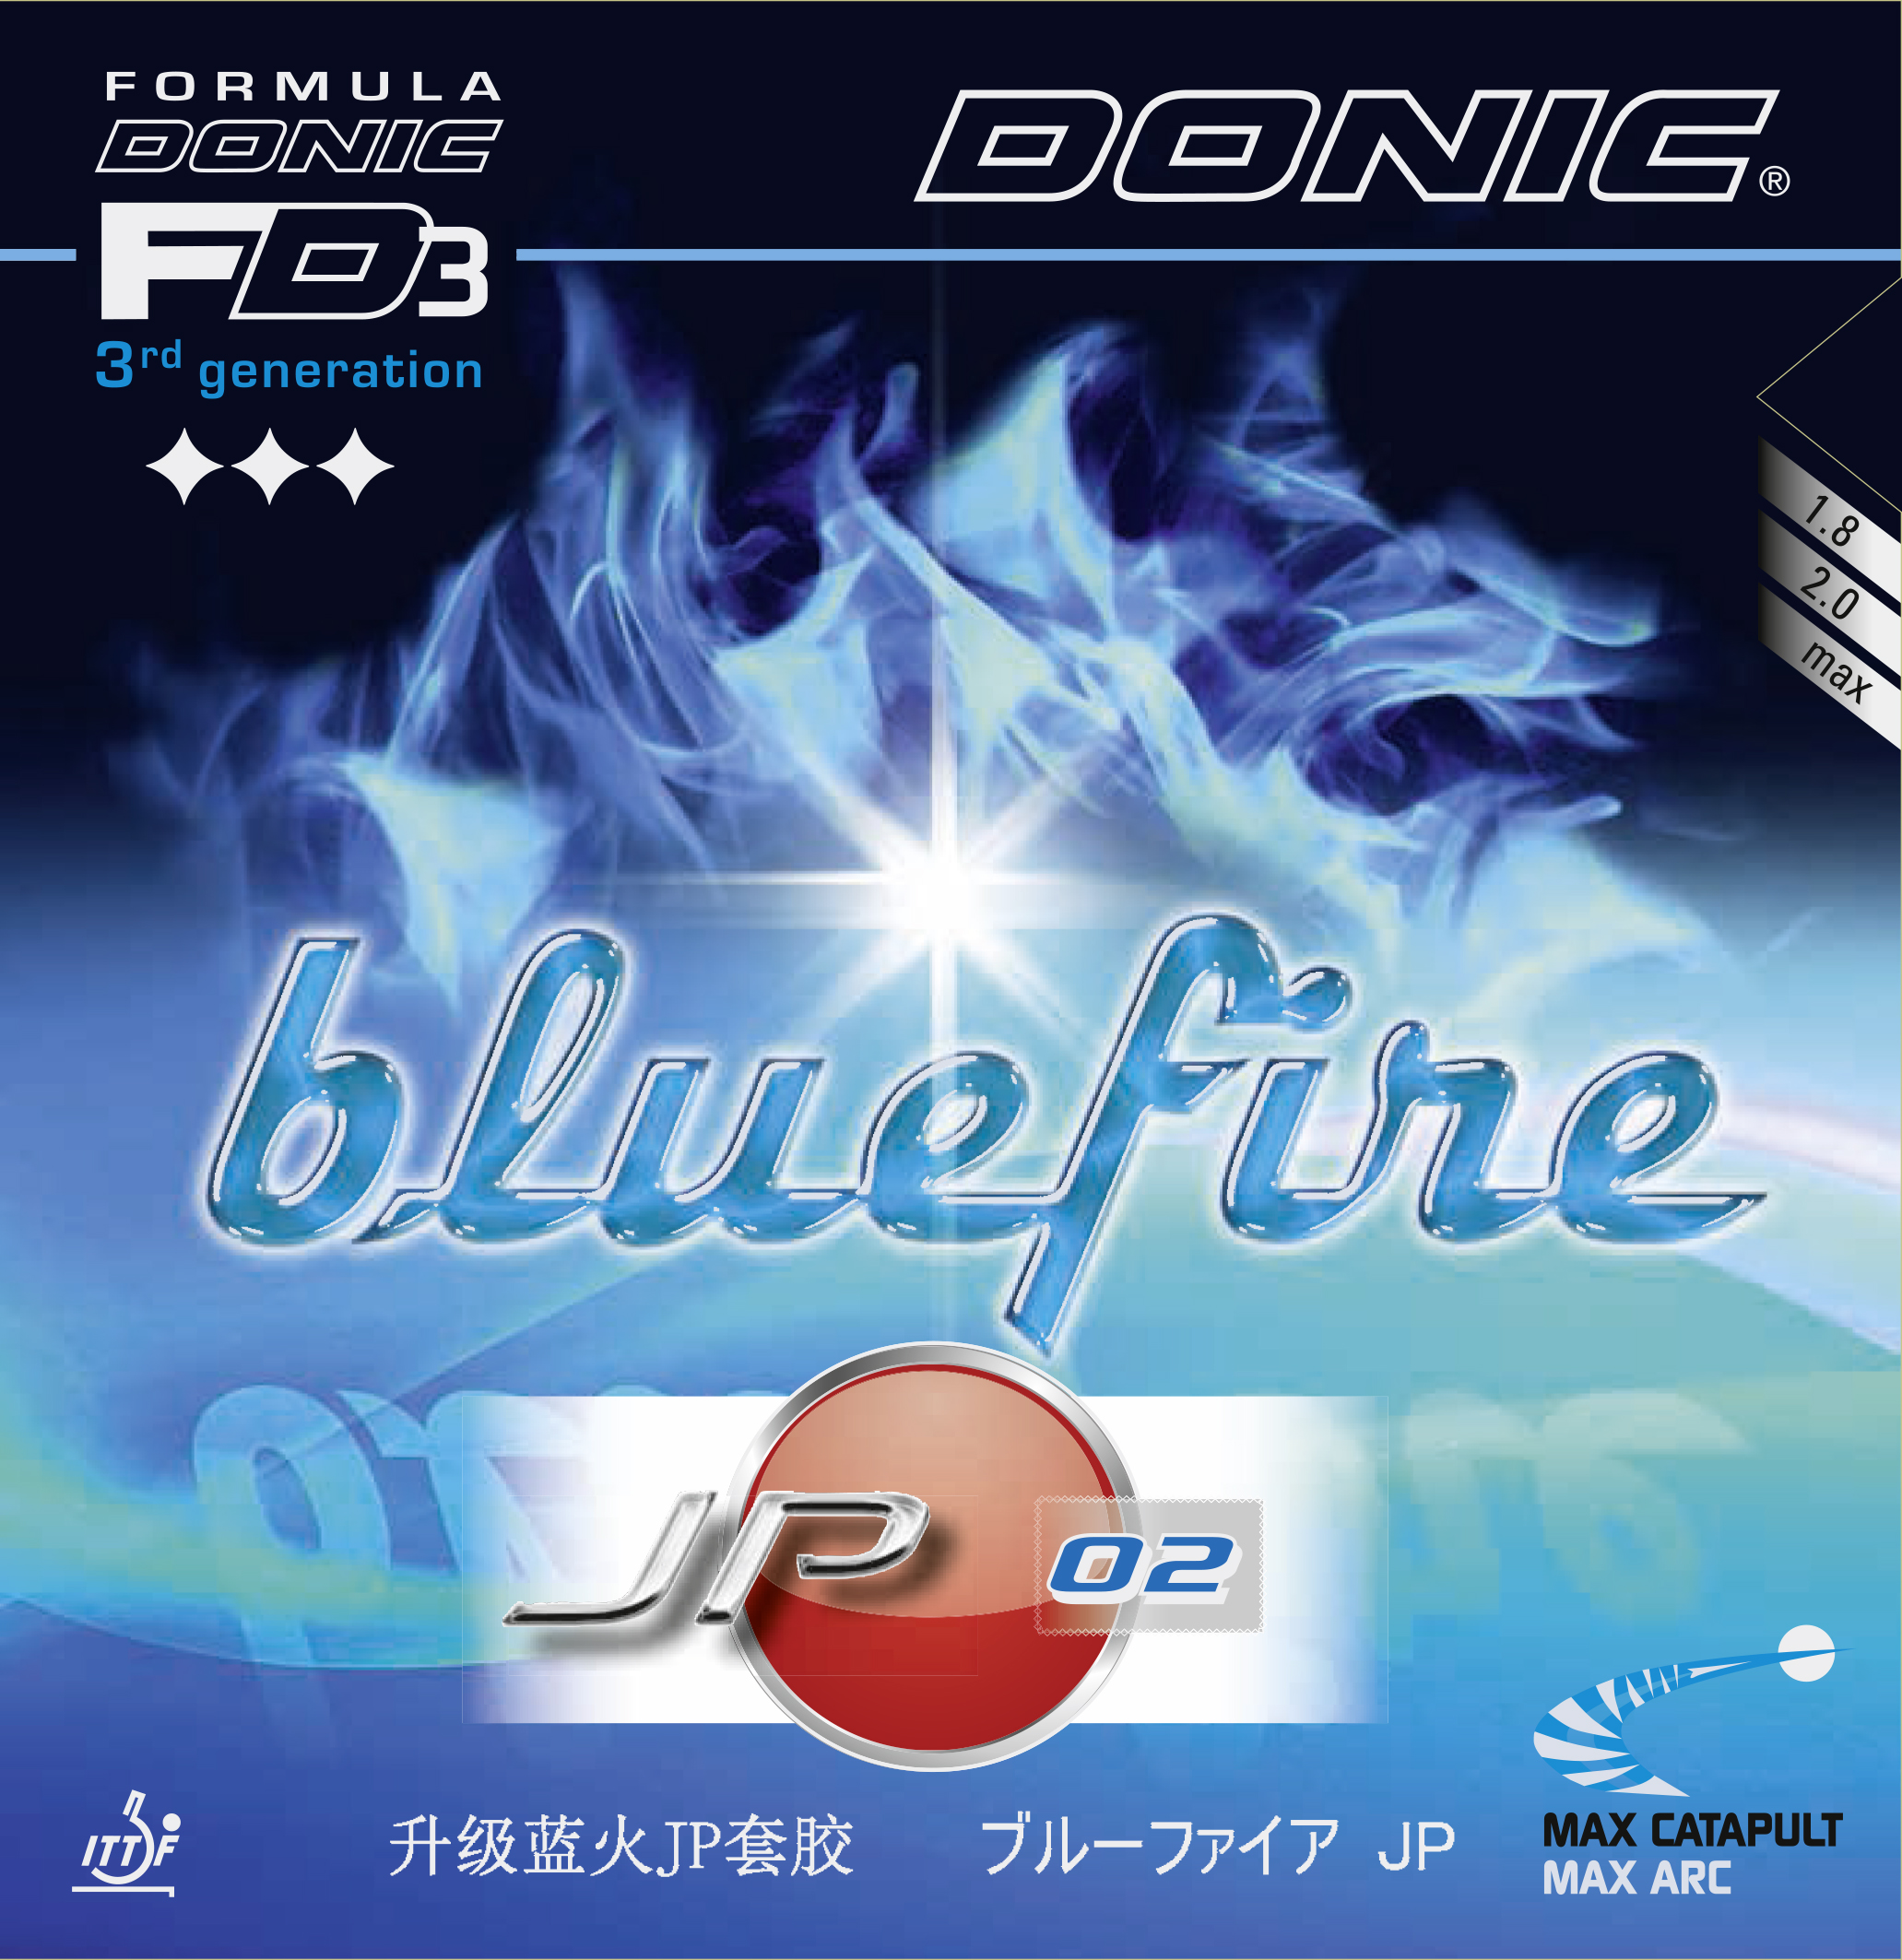 DONIC- rubber BLUEFIRE JP 02